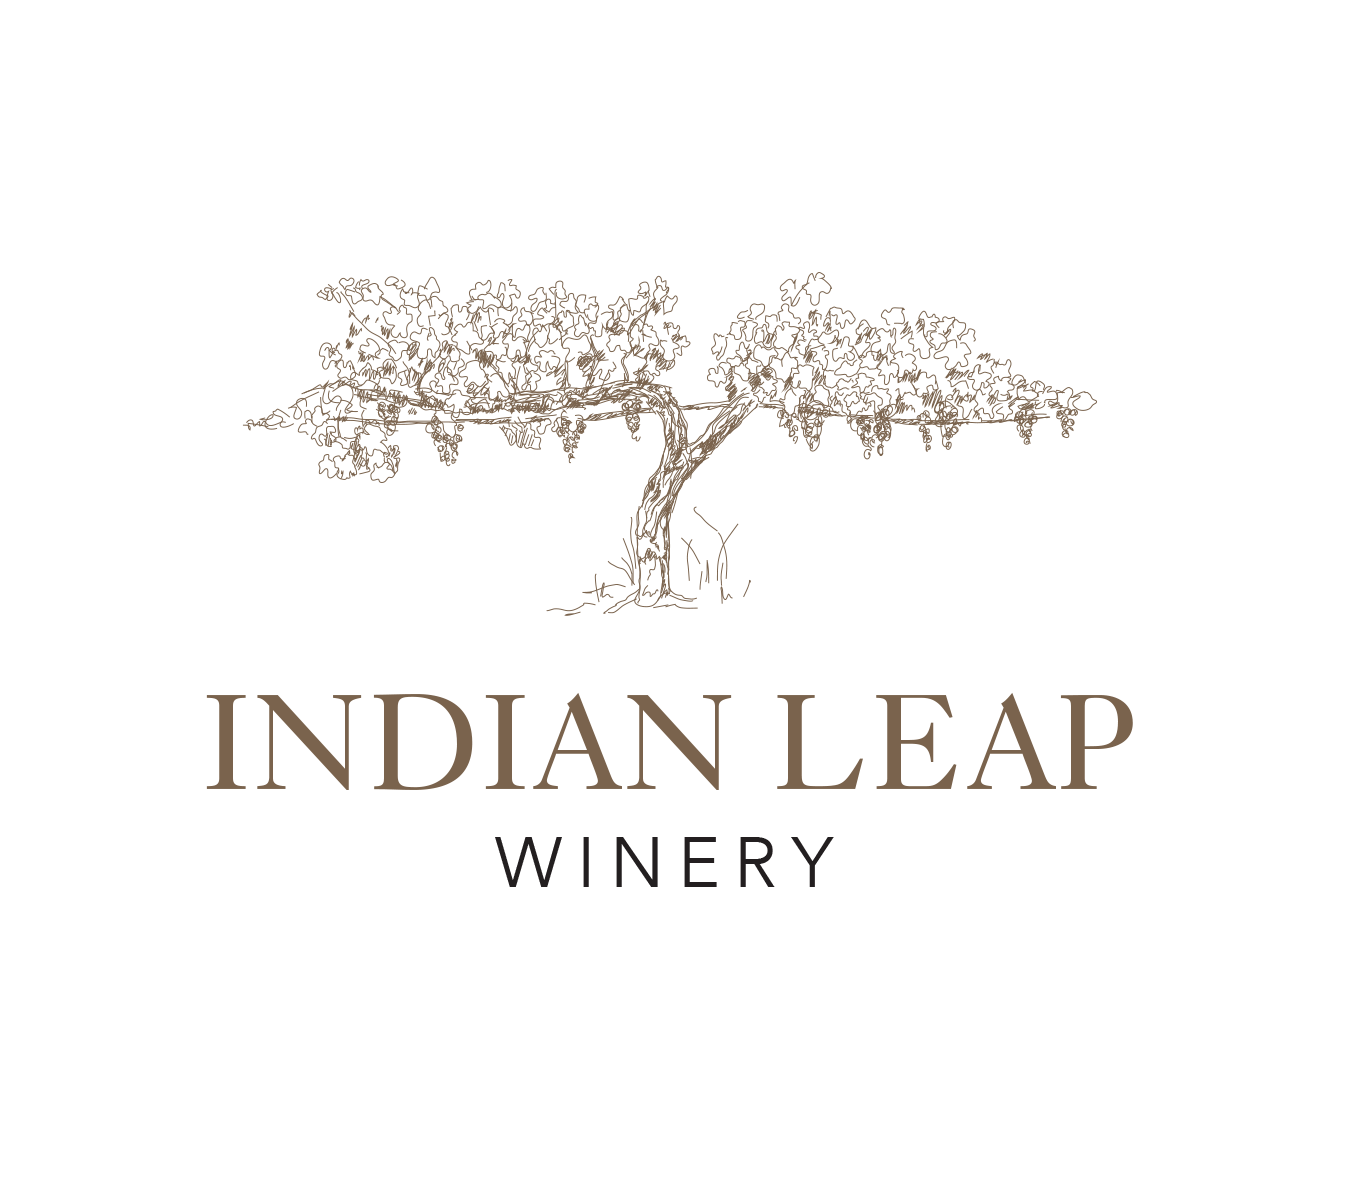  Indian Leap Winery